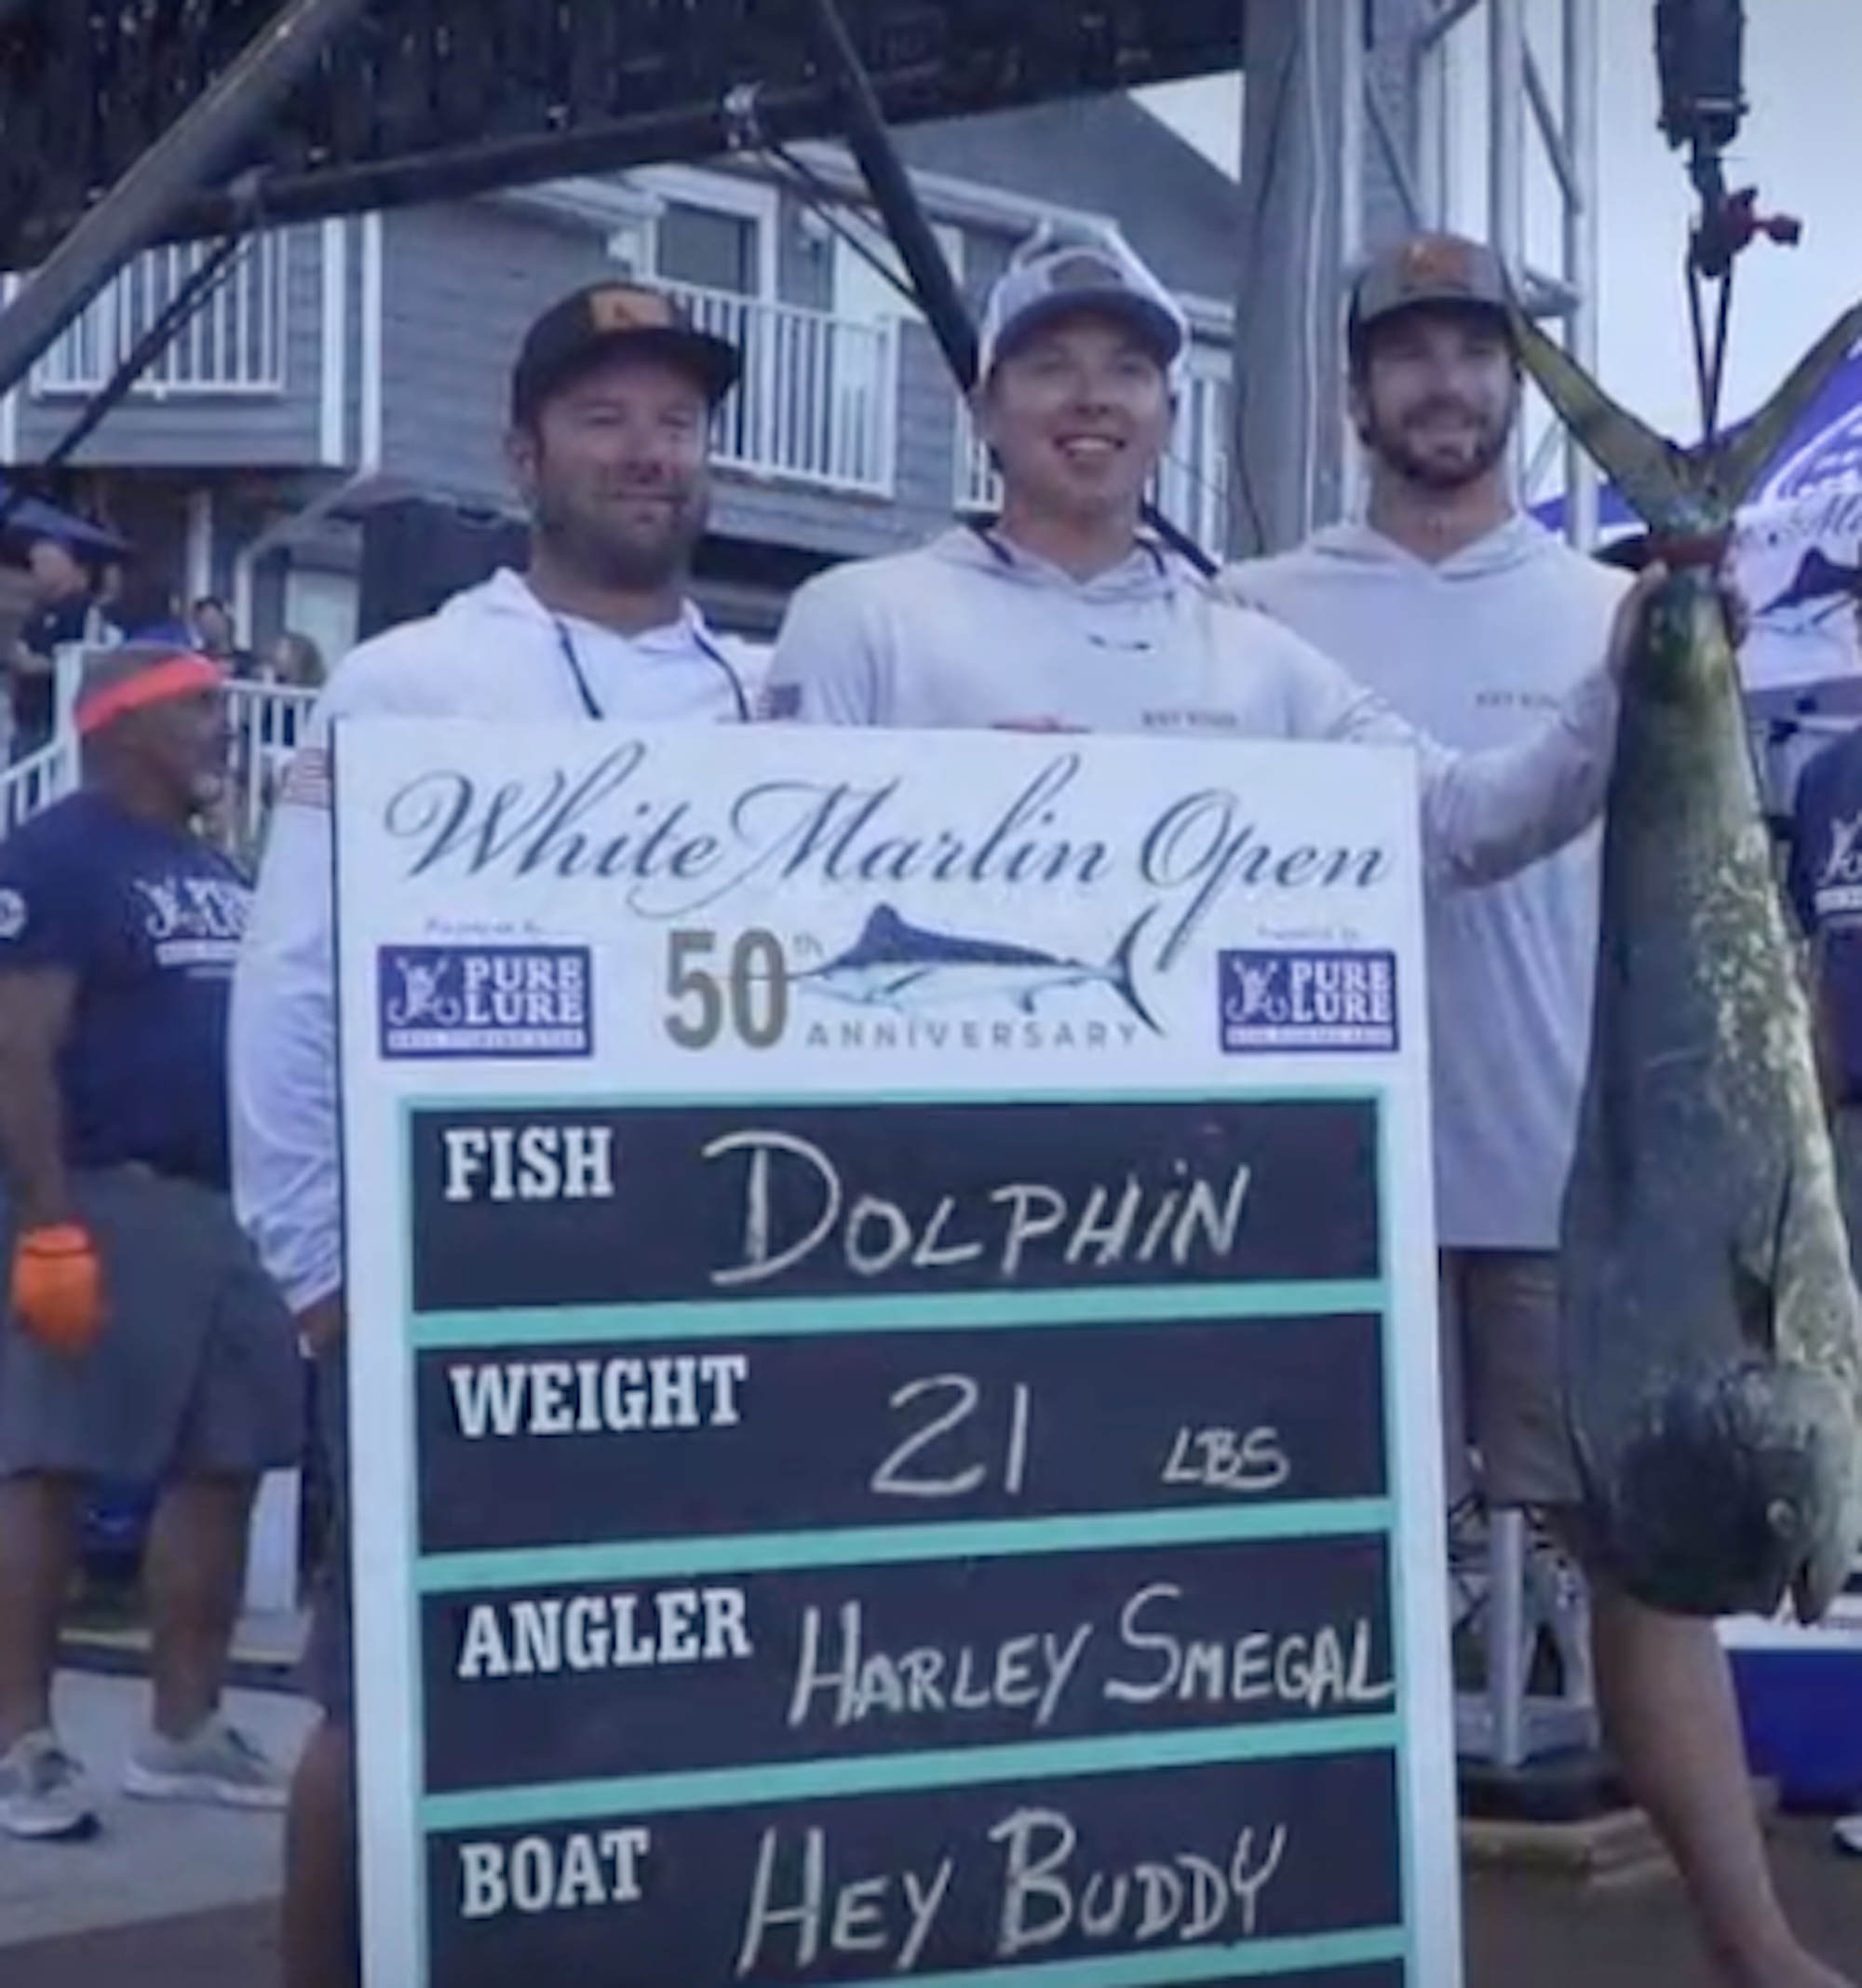 10 - 12 Foot Seas, But $70,000 Tuna Hits Board for Day 2 of The 50th White  Marlin Open - Ocean City MD Fishing